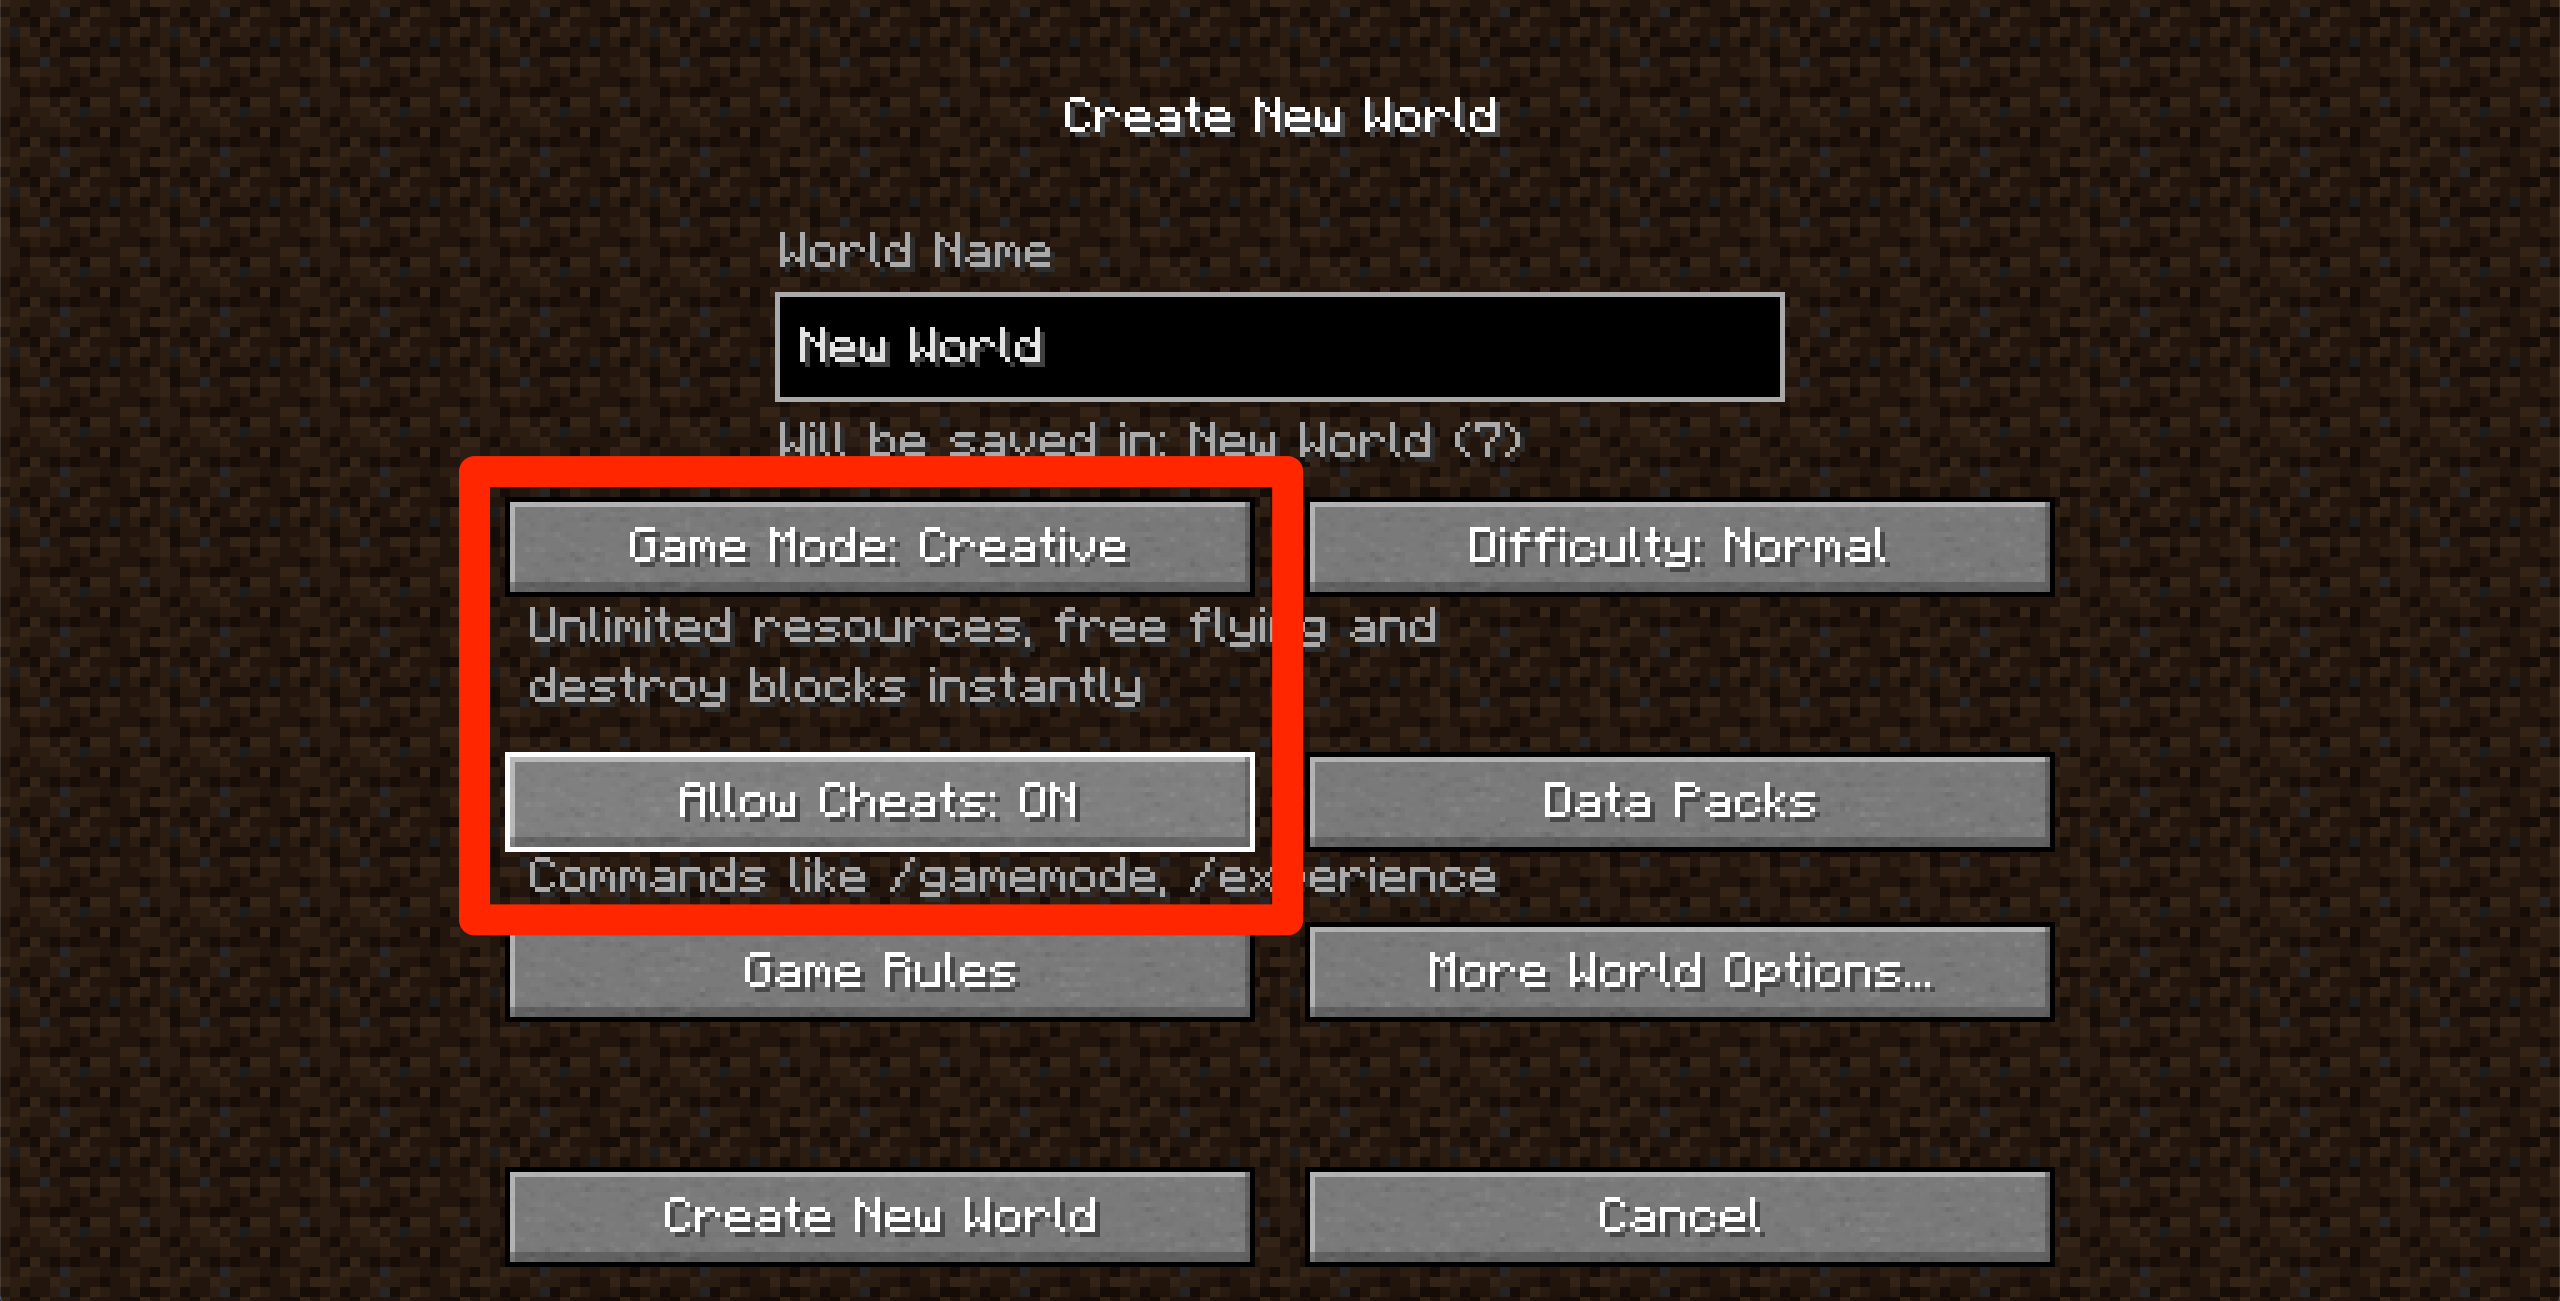 Minecraft's world generation screen, which allows the user to customize the world they're making. The gamemode and "cheats" options are highlighted.